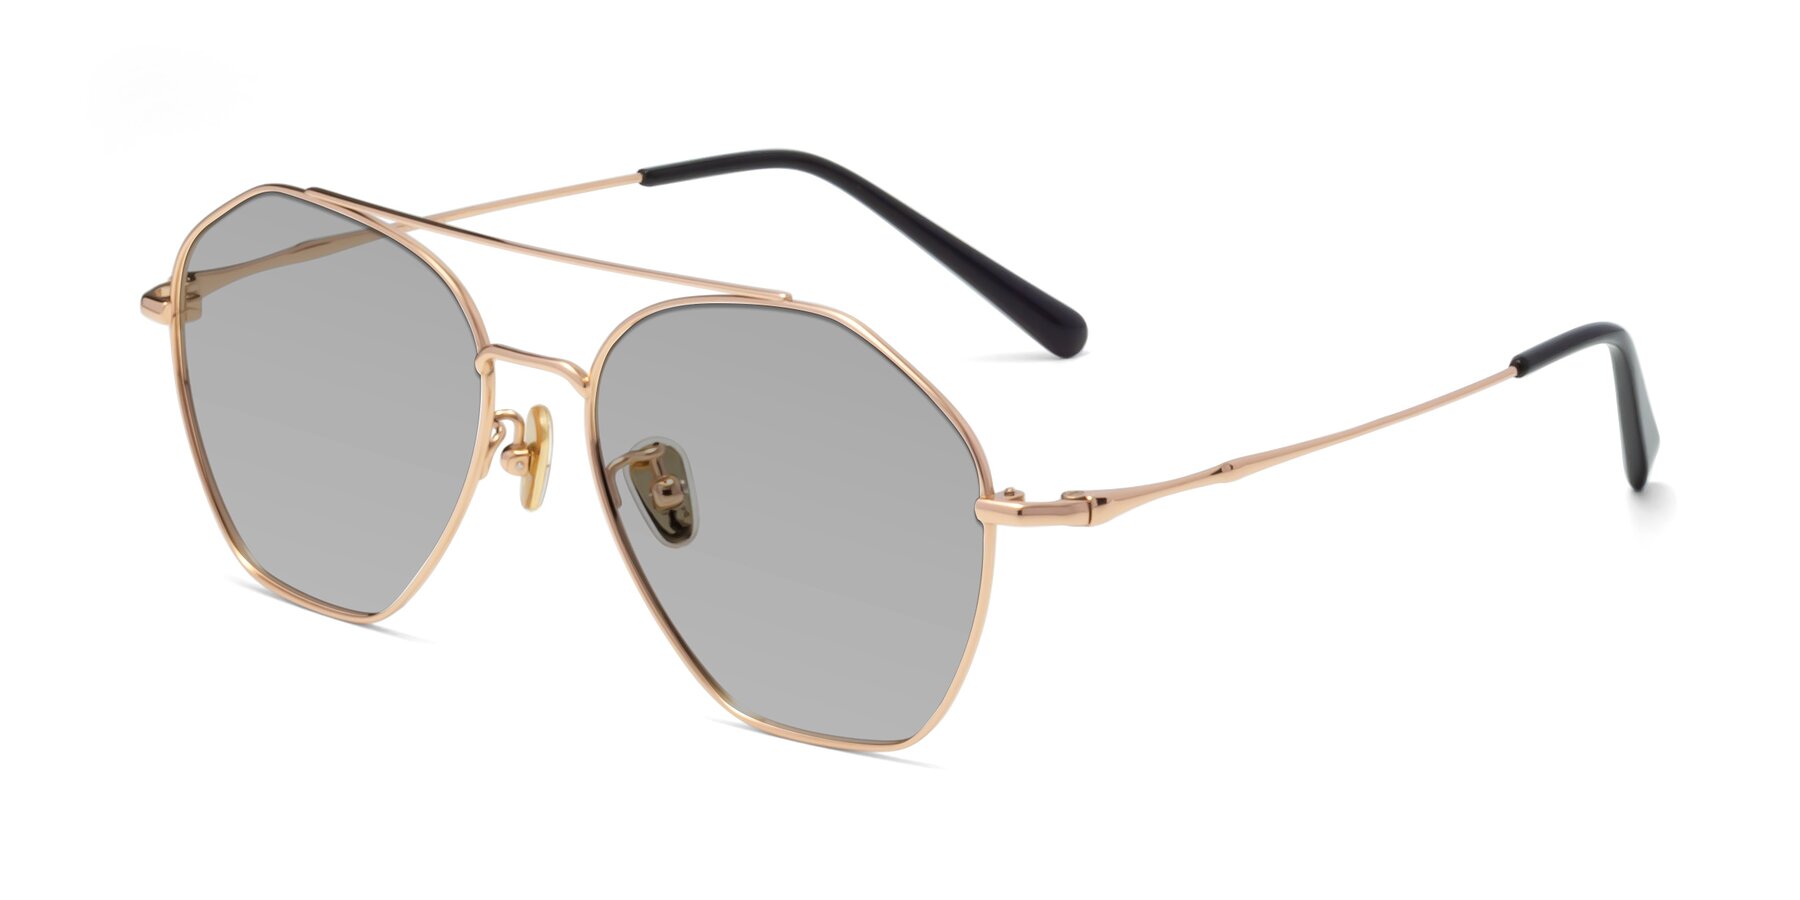 Angle of Linton in Rose Gold with Light Gray Tinted Lenses